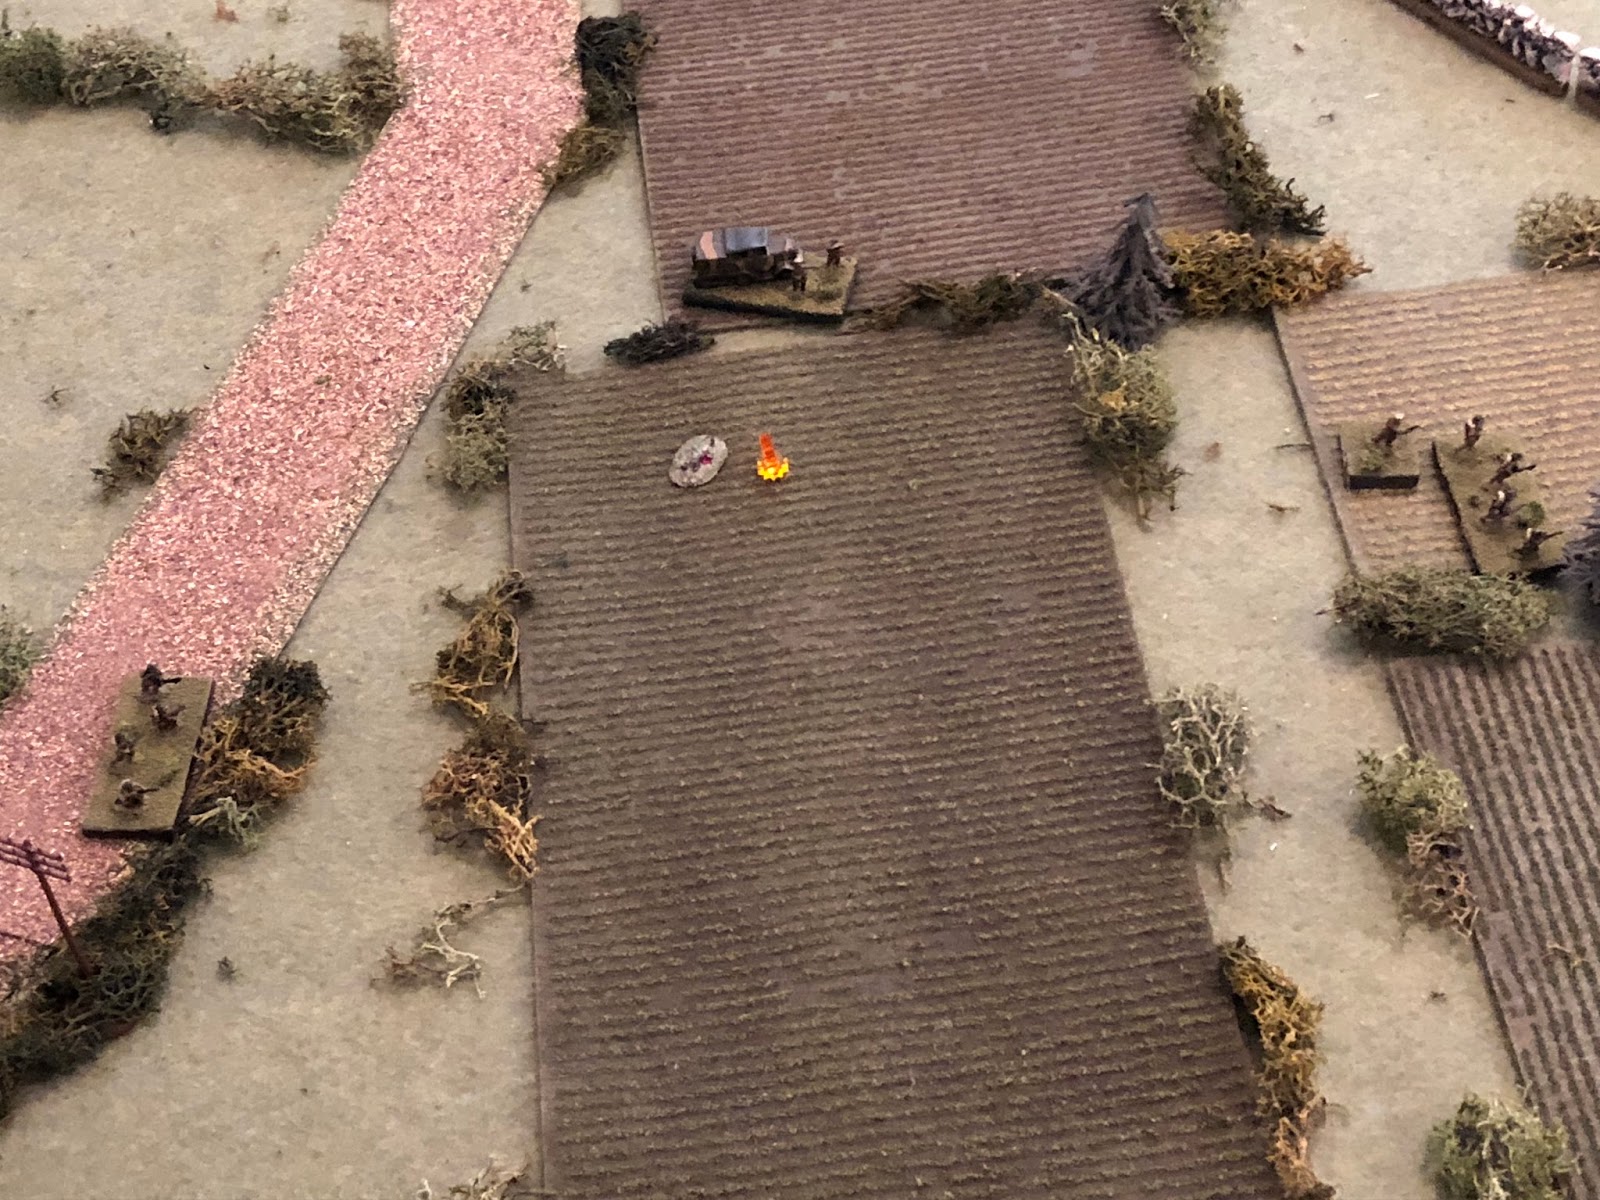  In the south, the French 1st Platoon is scattered and taking casualties.&nbsp; Rather than sit and wait, the platoon commander grabs 1st Squad and pushes them forward (far right), as Capitan Cognac (top center) and 3rd Squad (far left) look on. 